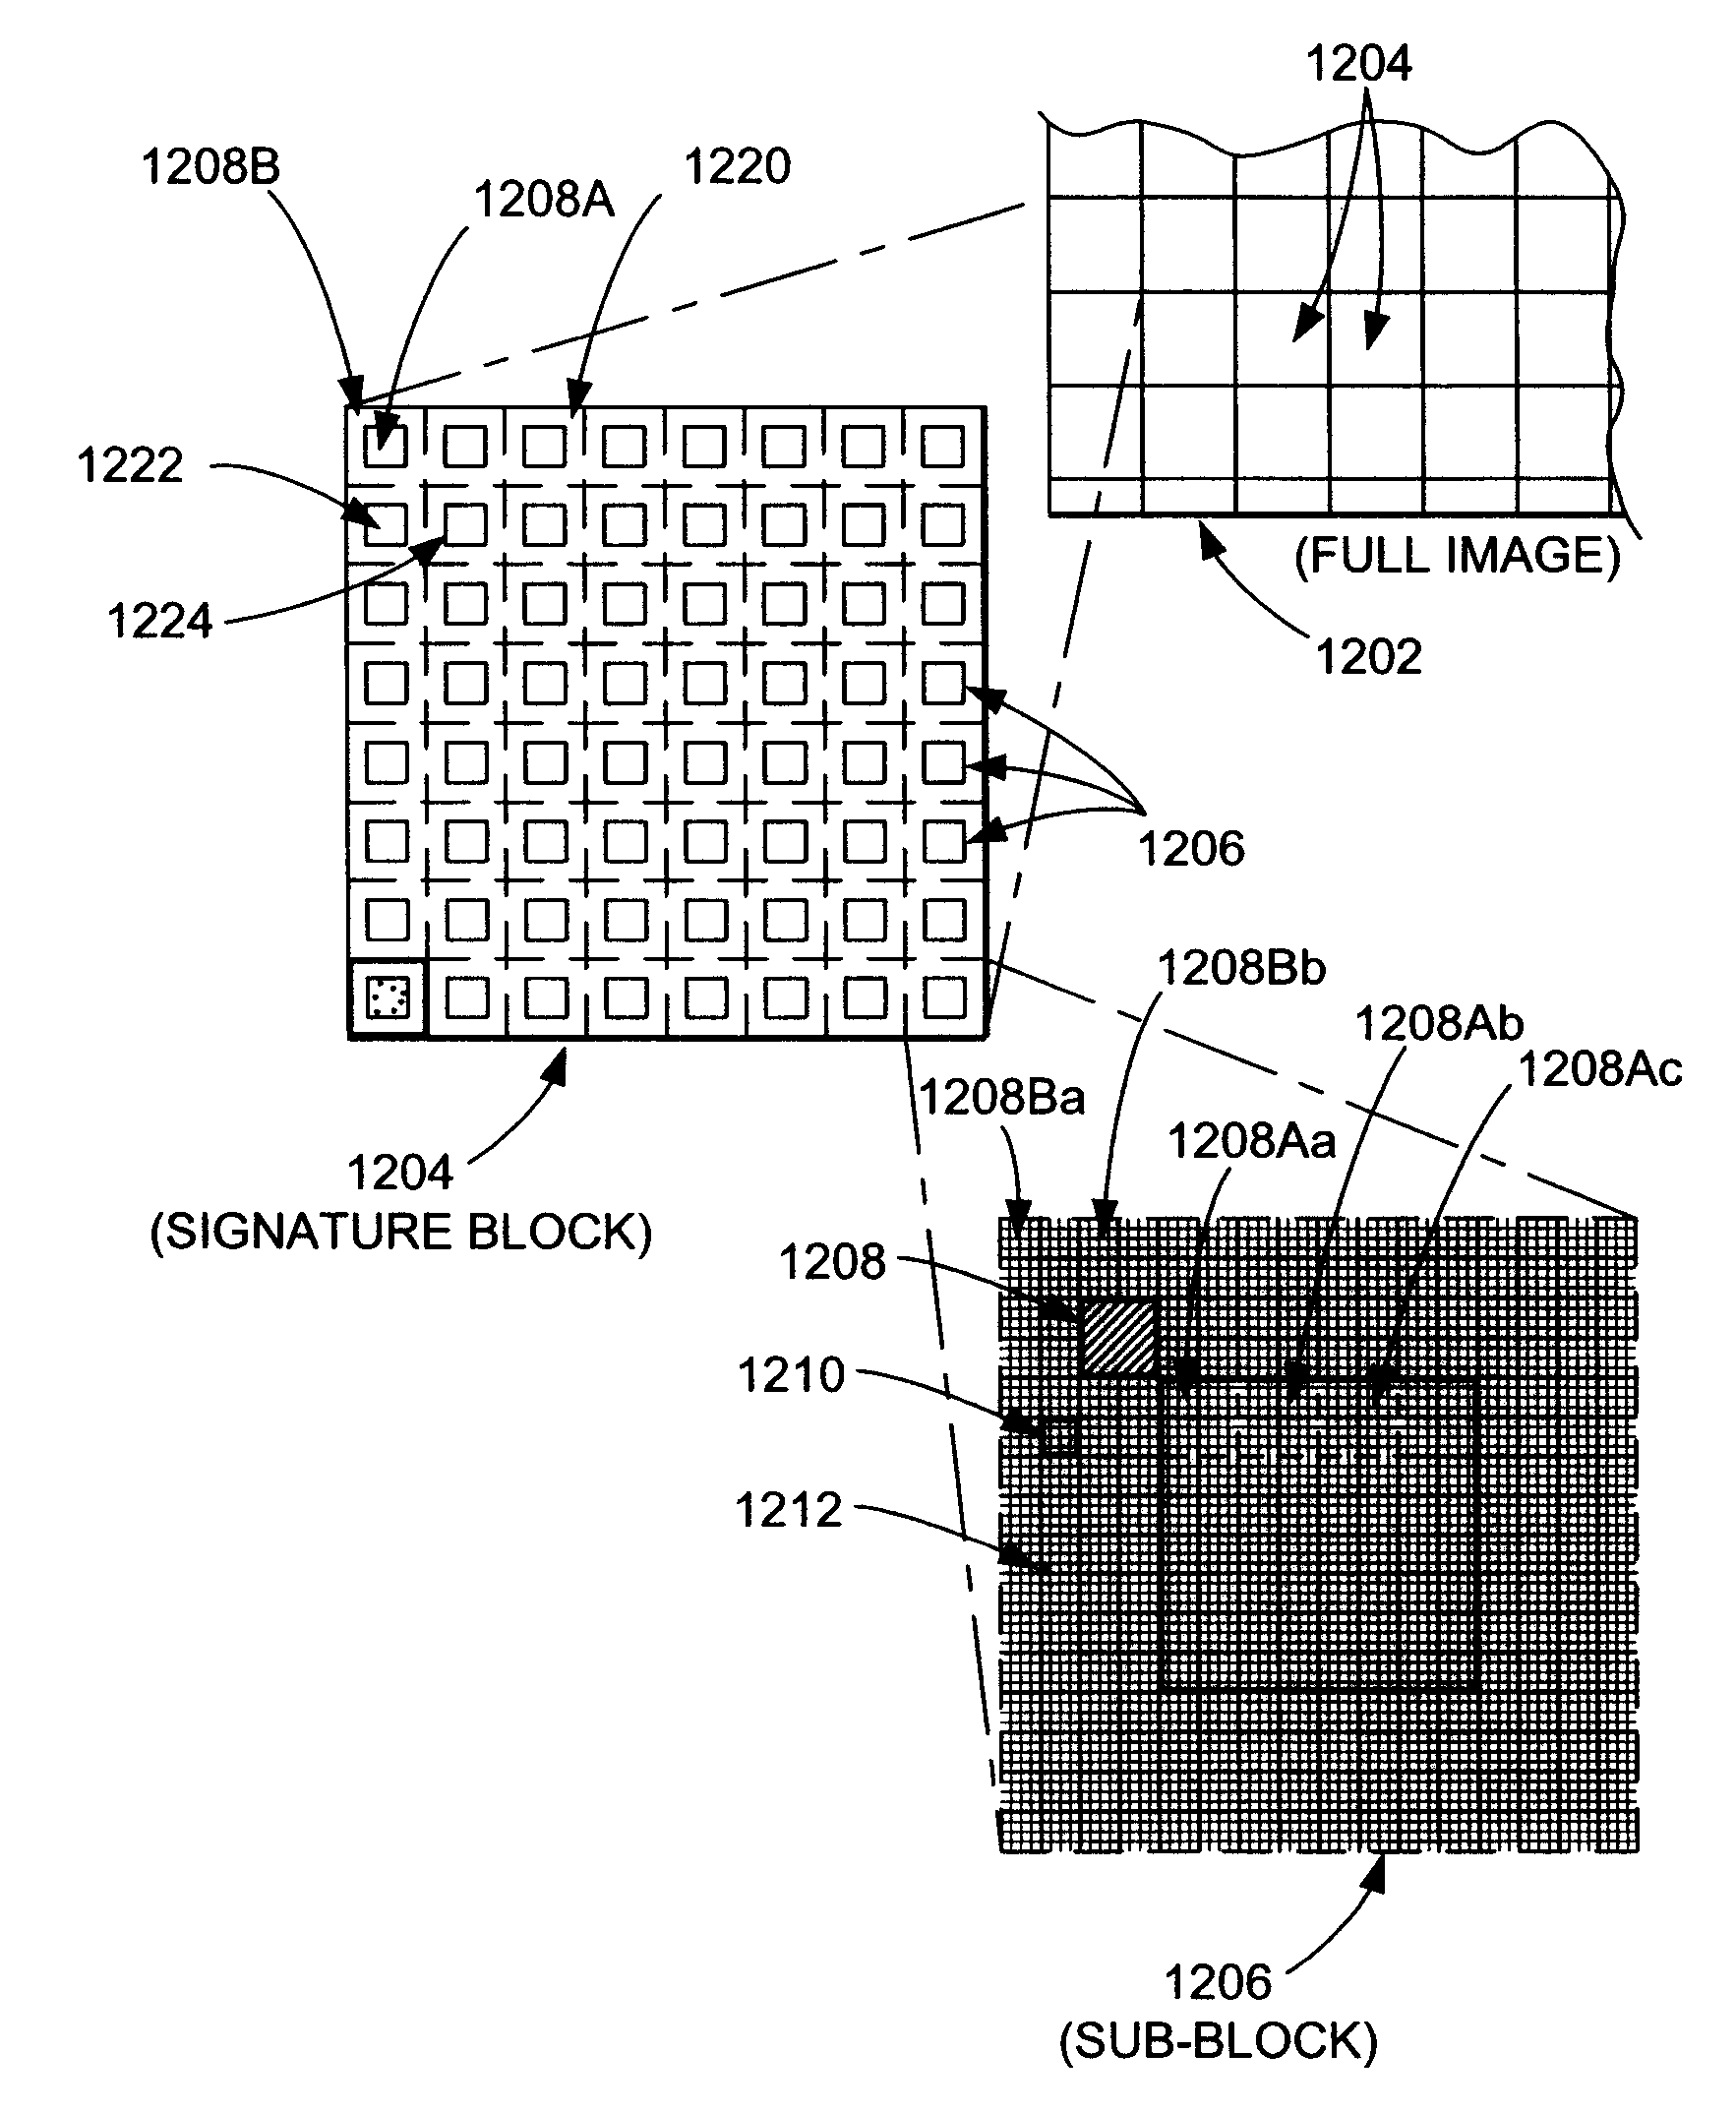 Variable Message Coding Protocols for Encoding Auxiliary Data in Media Signals